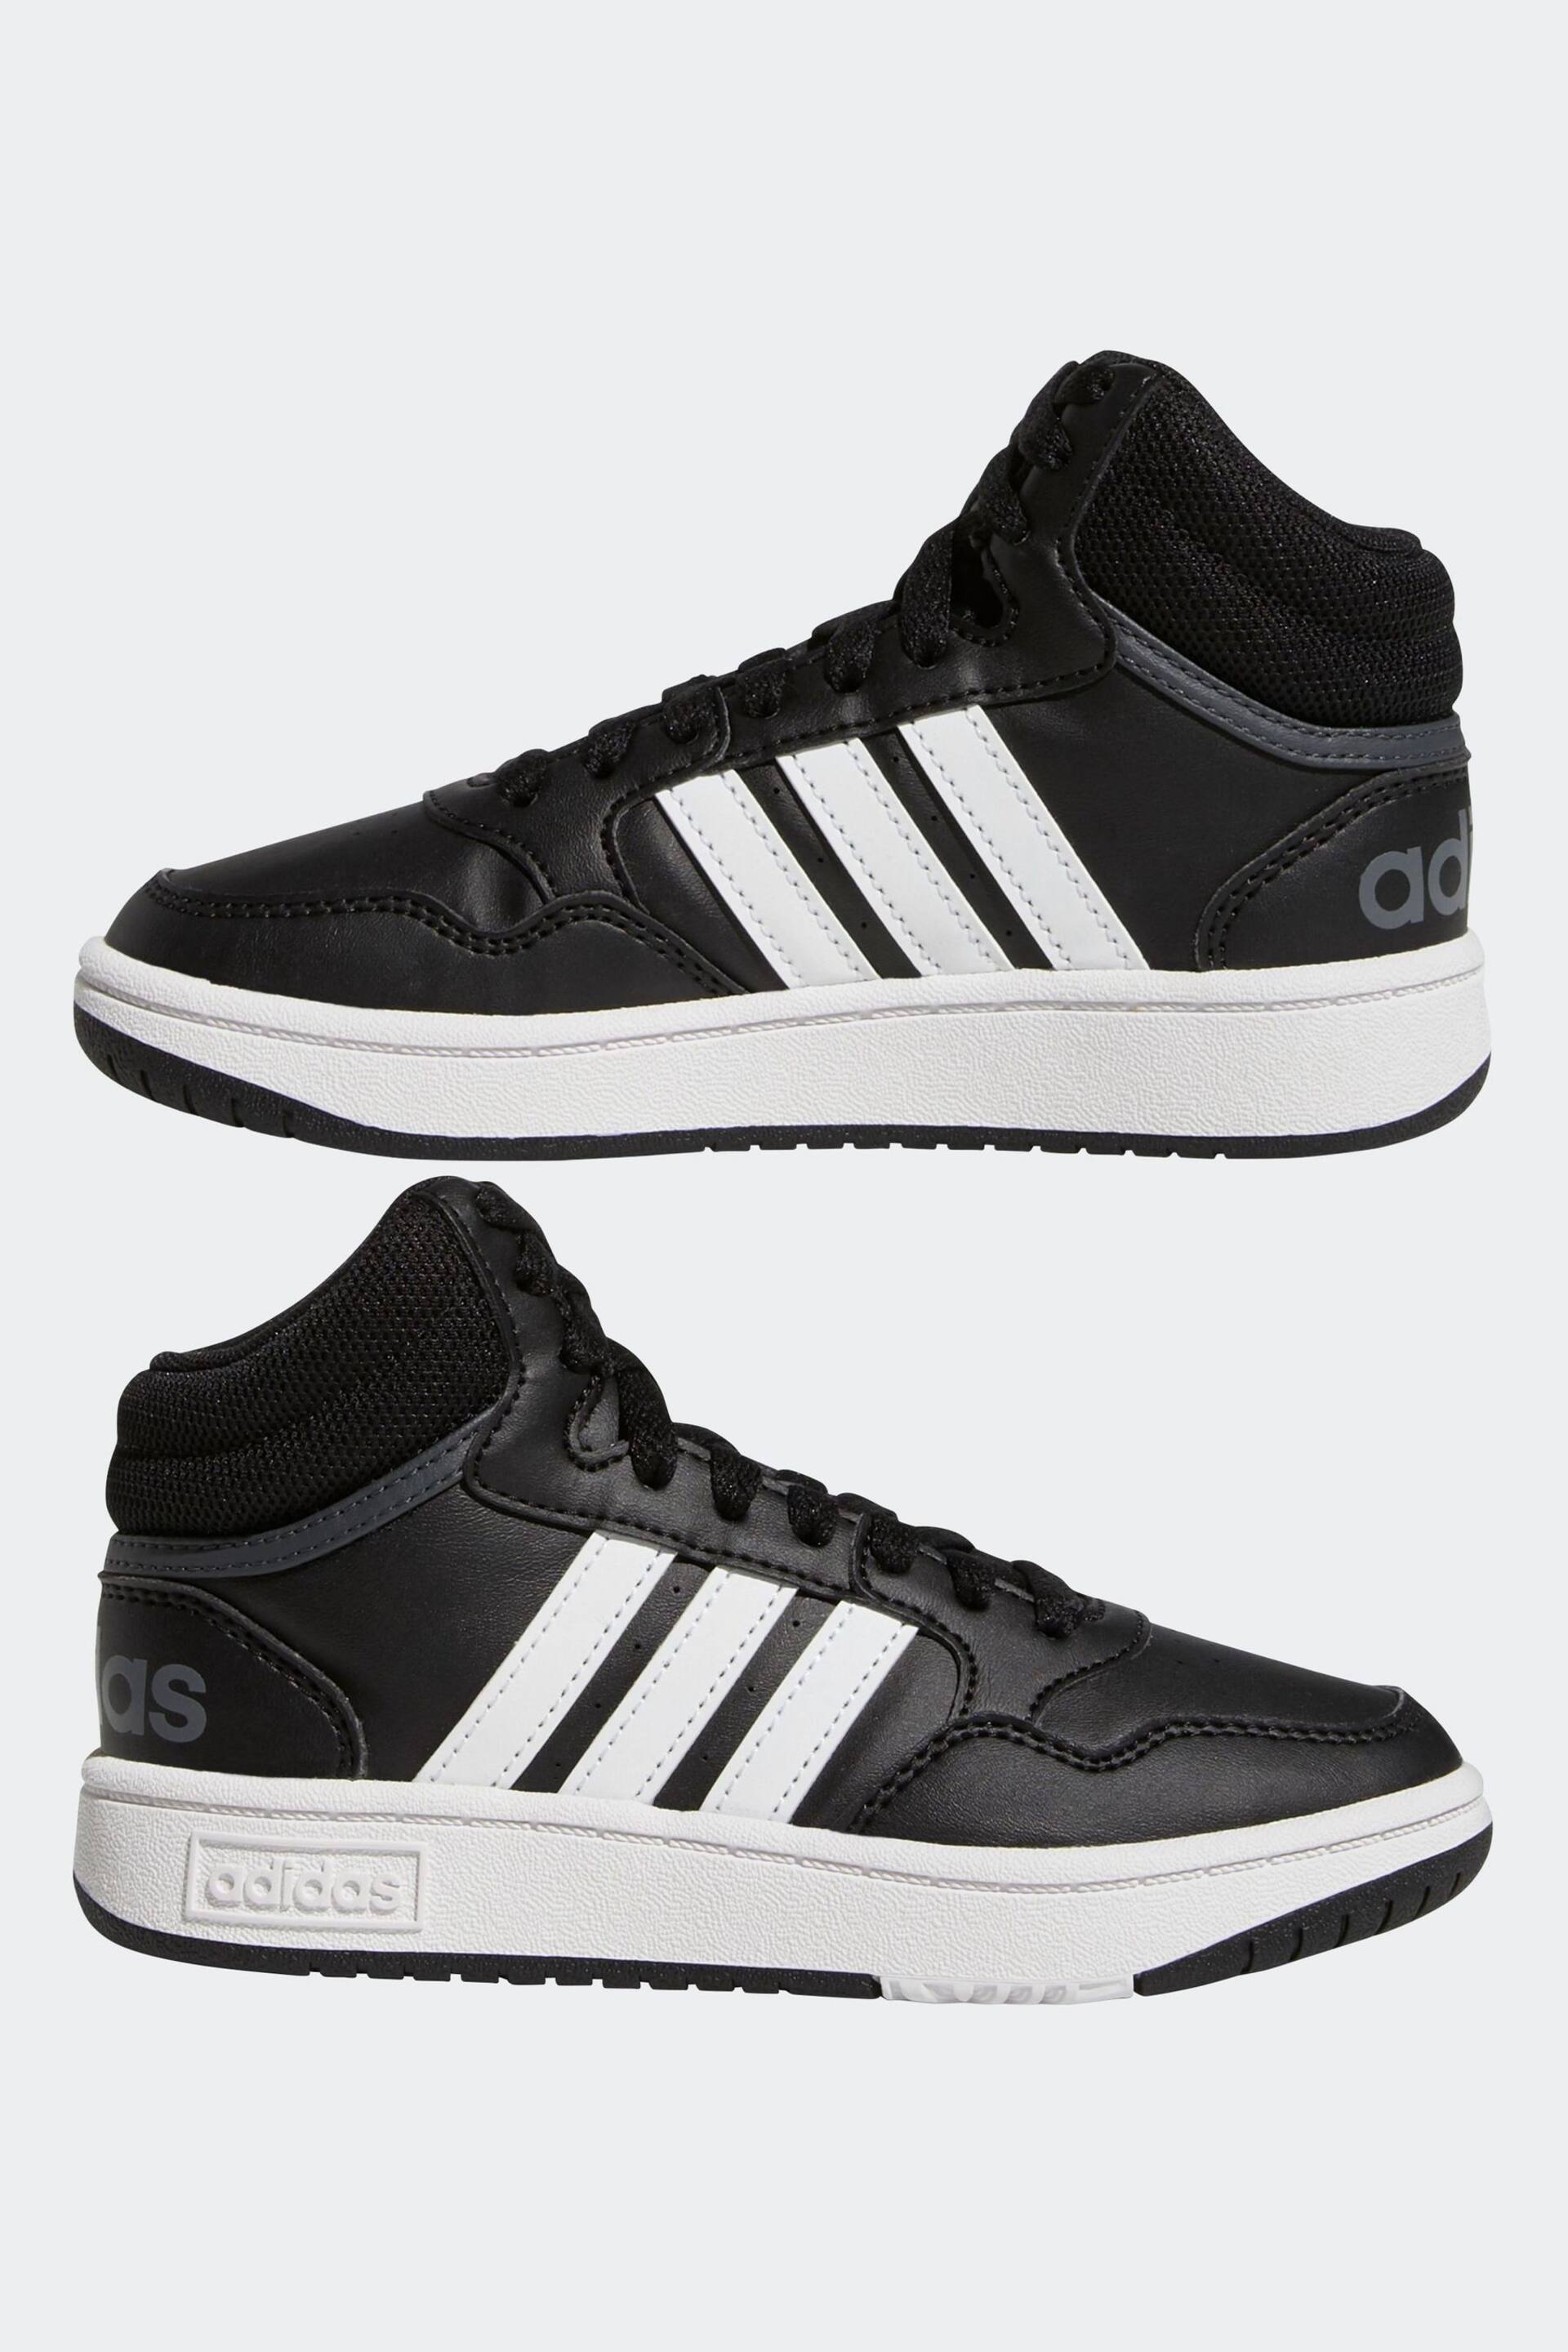 adidas Black/white Hoops Mid Shoes - Image 5 of 9